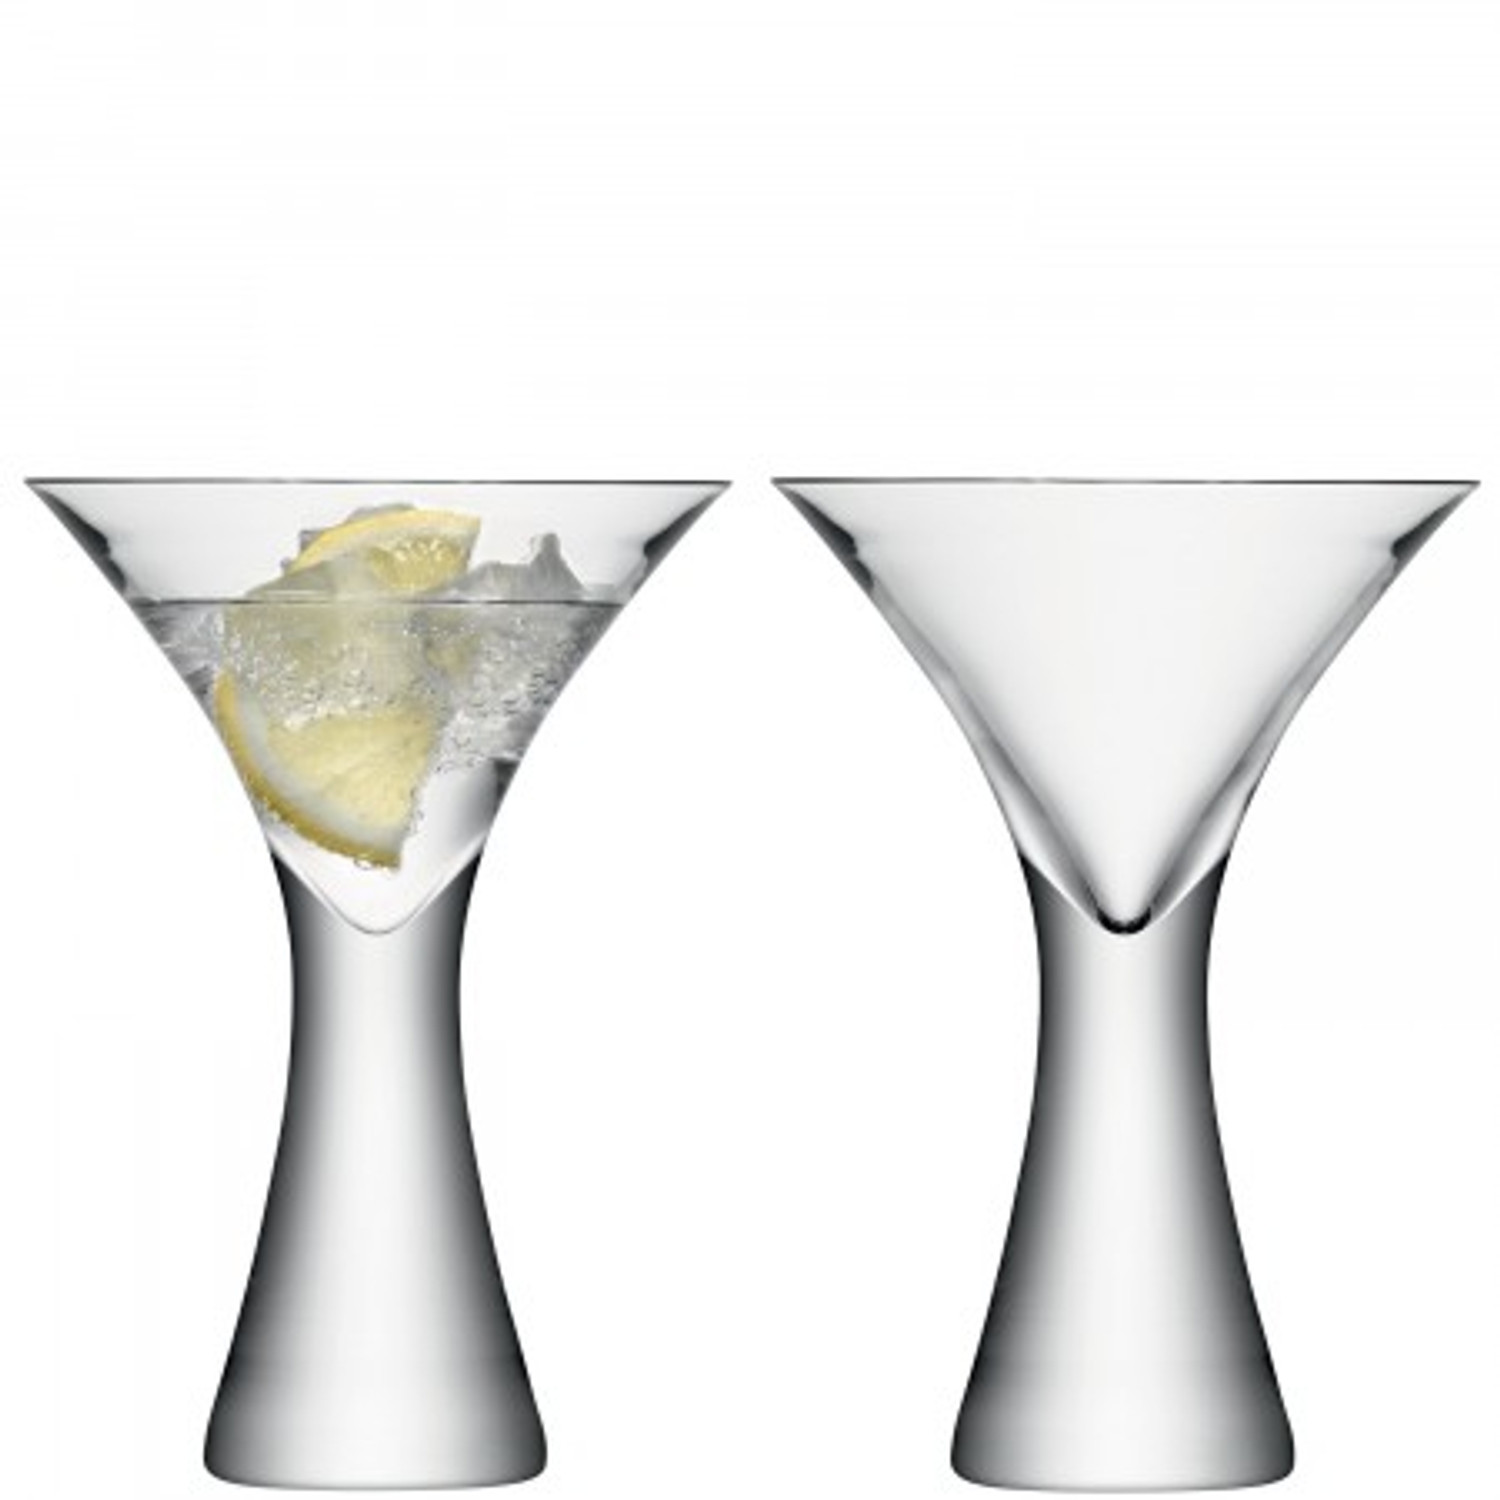 https://cdn11.bigcommerce.com/s-seah8s/images/stencil/1500x1500/products/2599/3262/LSA_Moya_Cocktail_Glass_300ml_Set_of_2__56041.1654605239.jpg?c=2